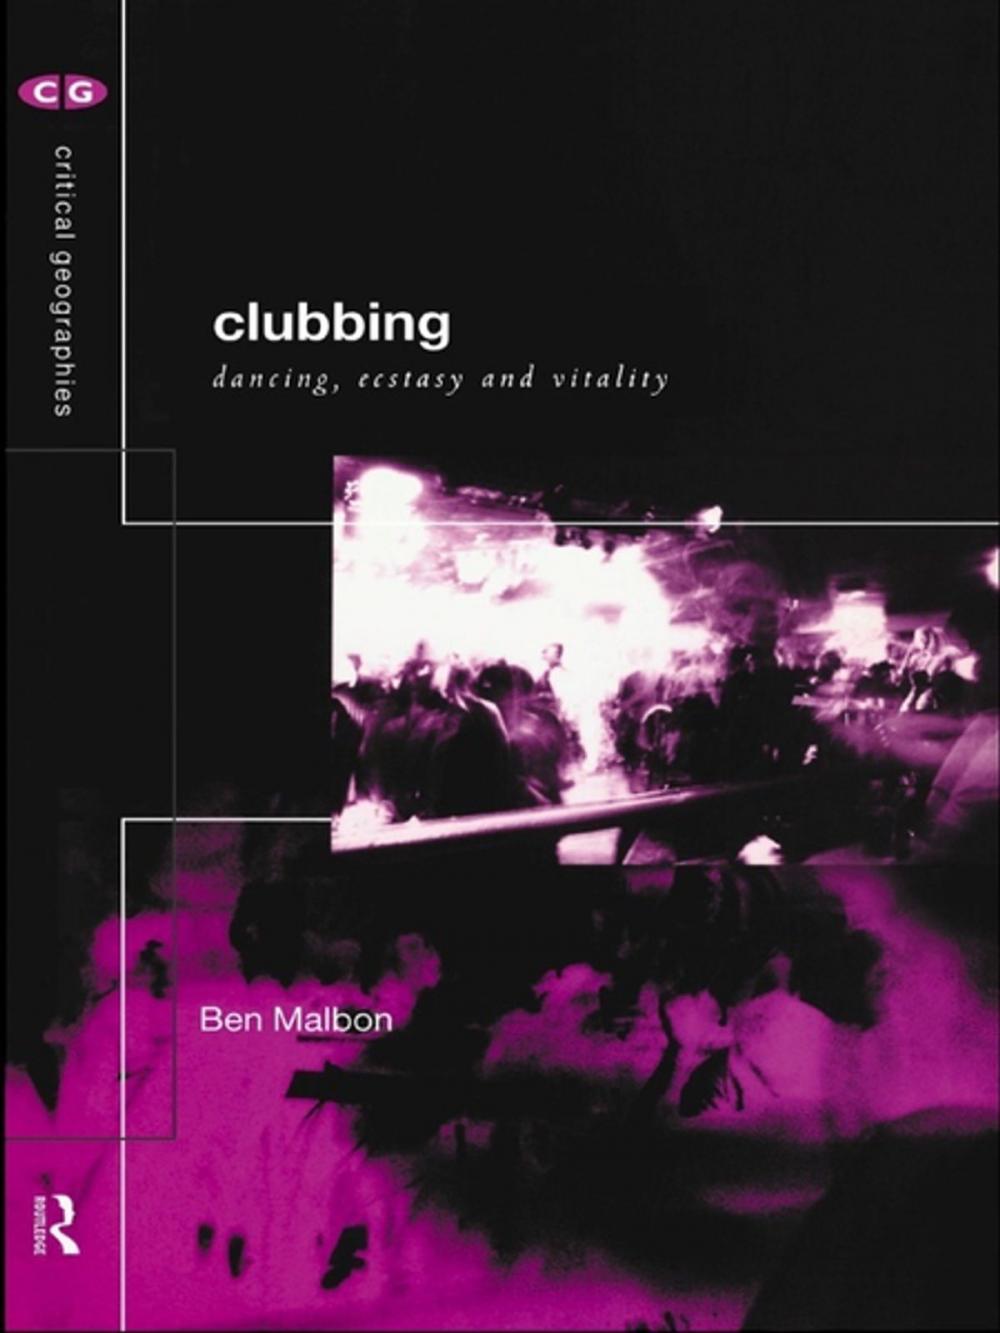 Clubbing Dancing, Ecstasy And Vitality, By Ben Malbon